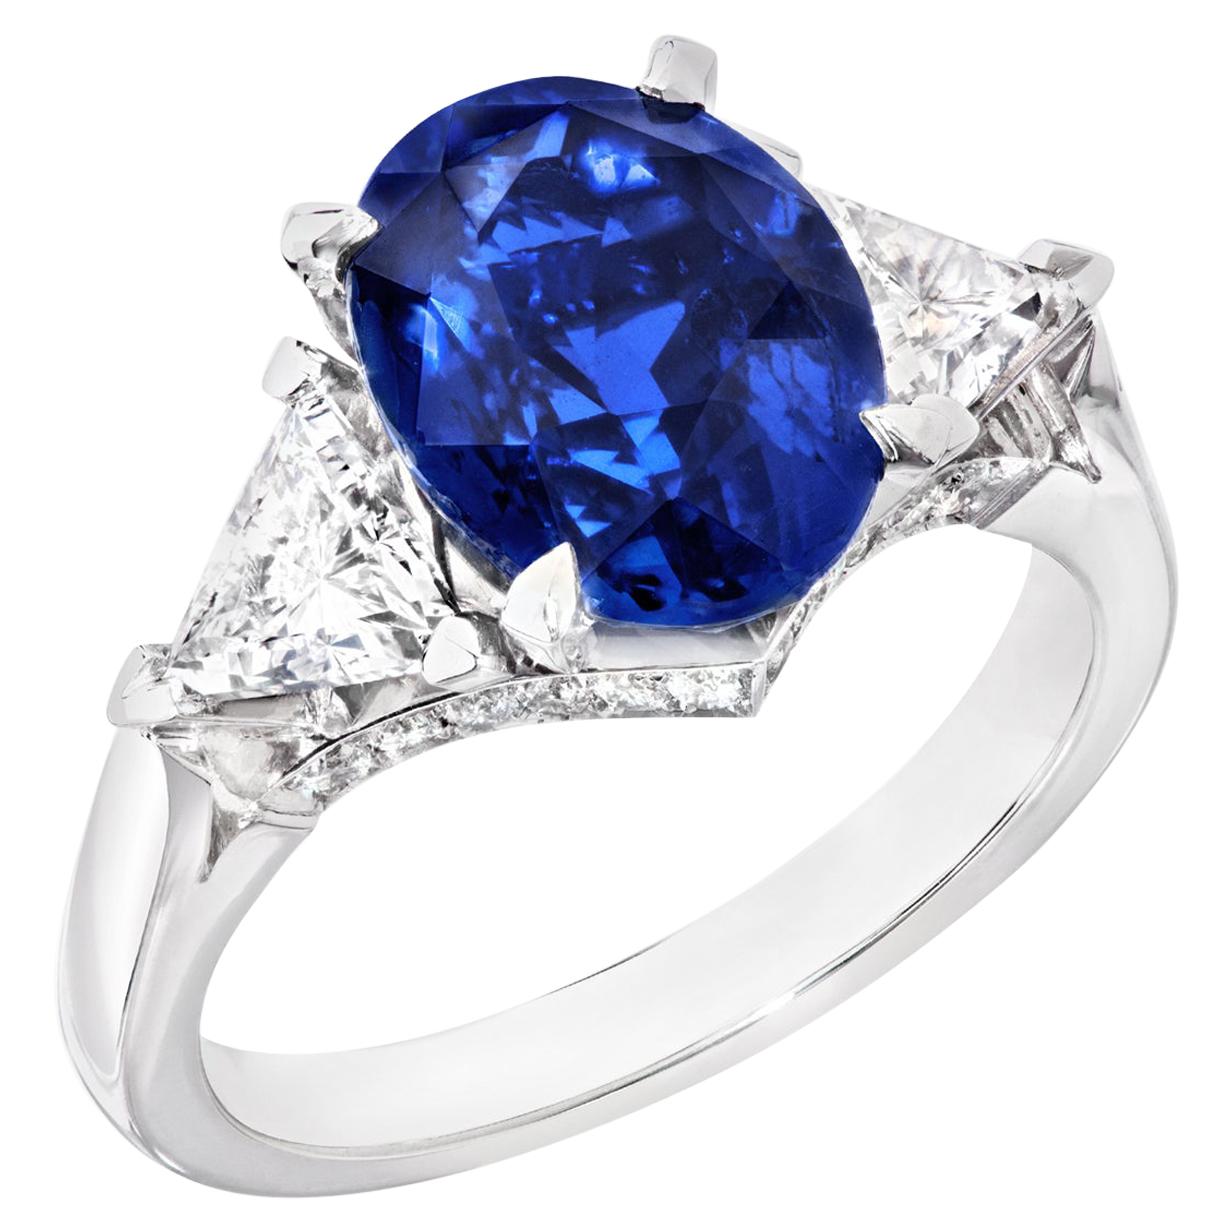 Fabergé Platinum Oval 5.12ct Royal Blue Sapphire Ring Set With White Diamonds For Sale